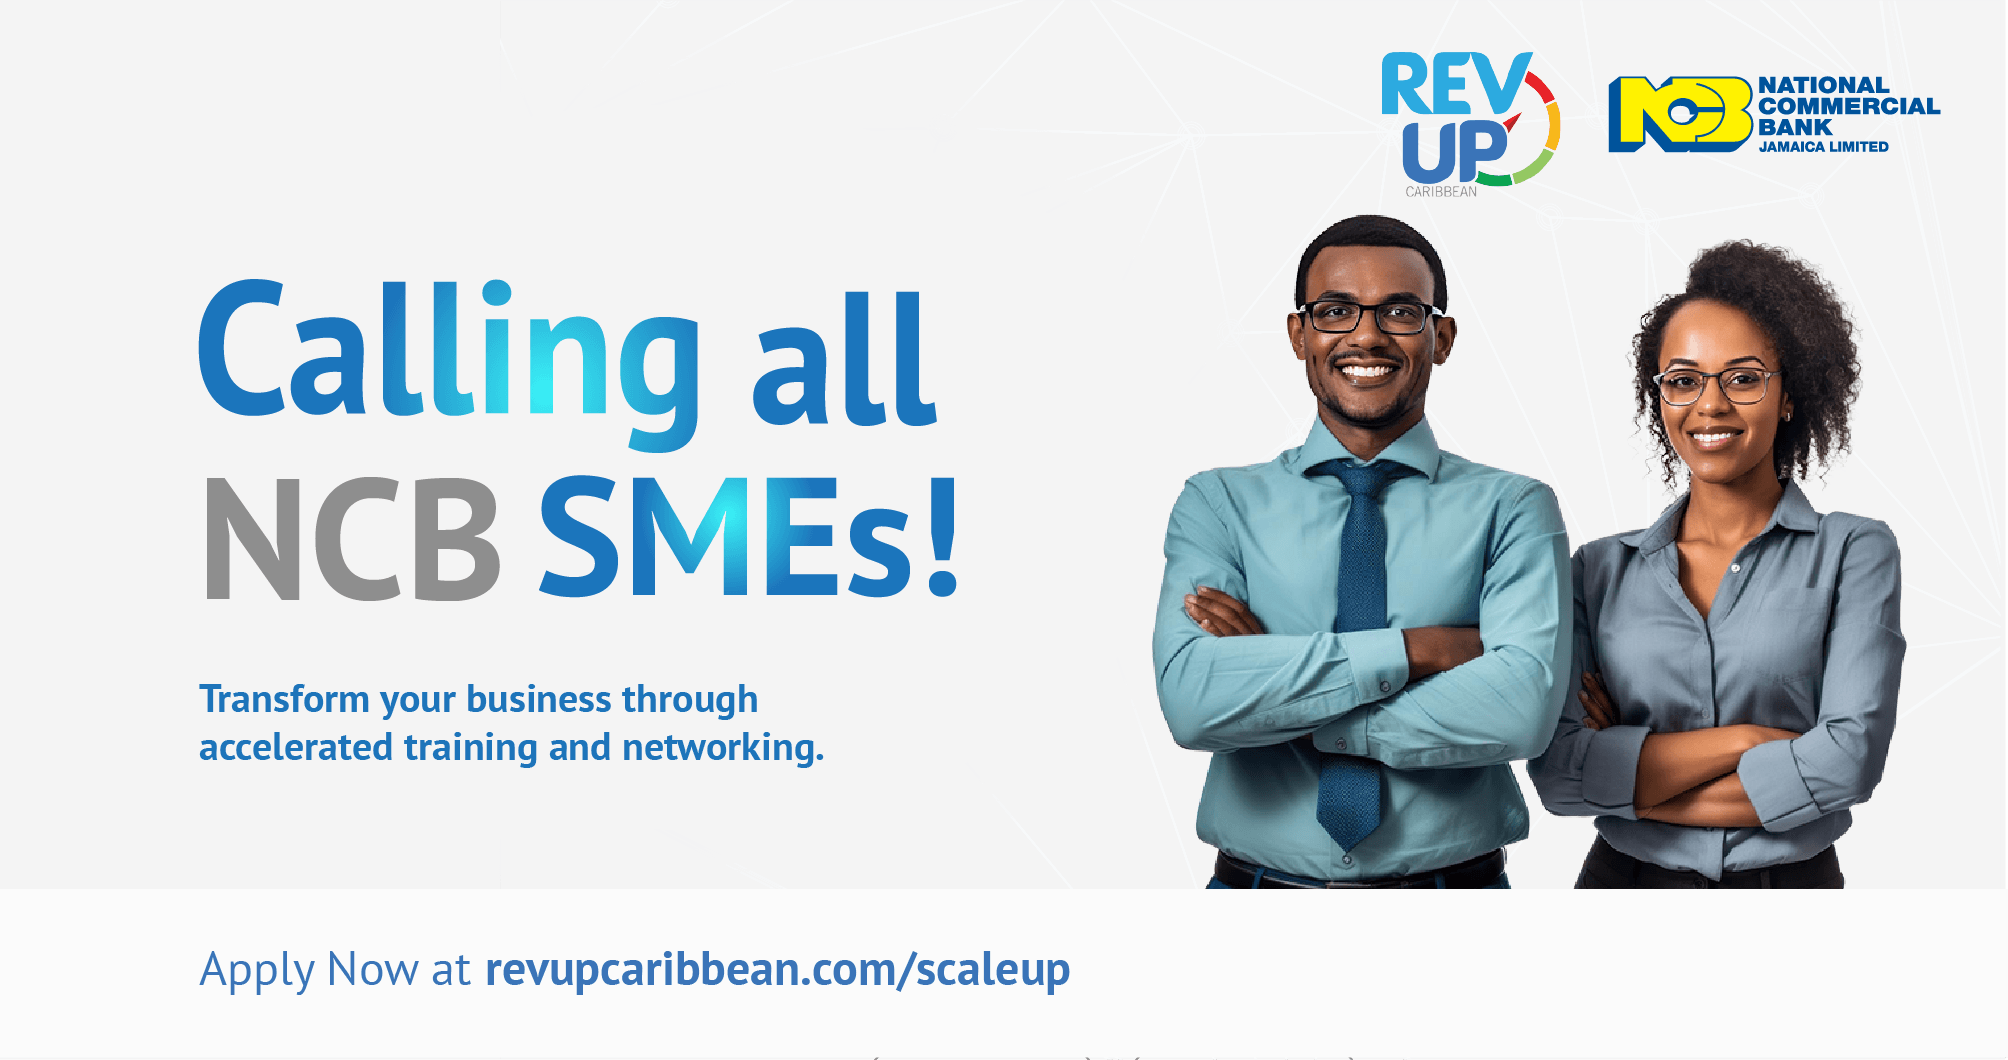 RevUp for Success: NCB SMEs, Transform Your Business